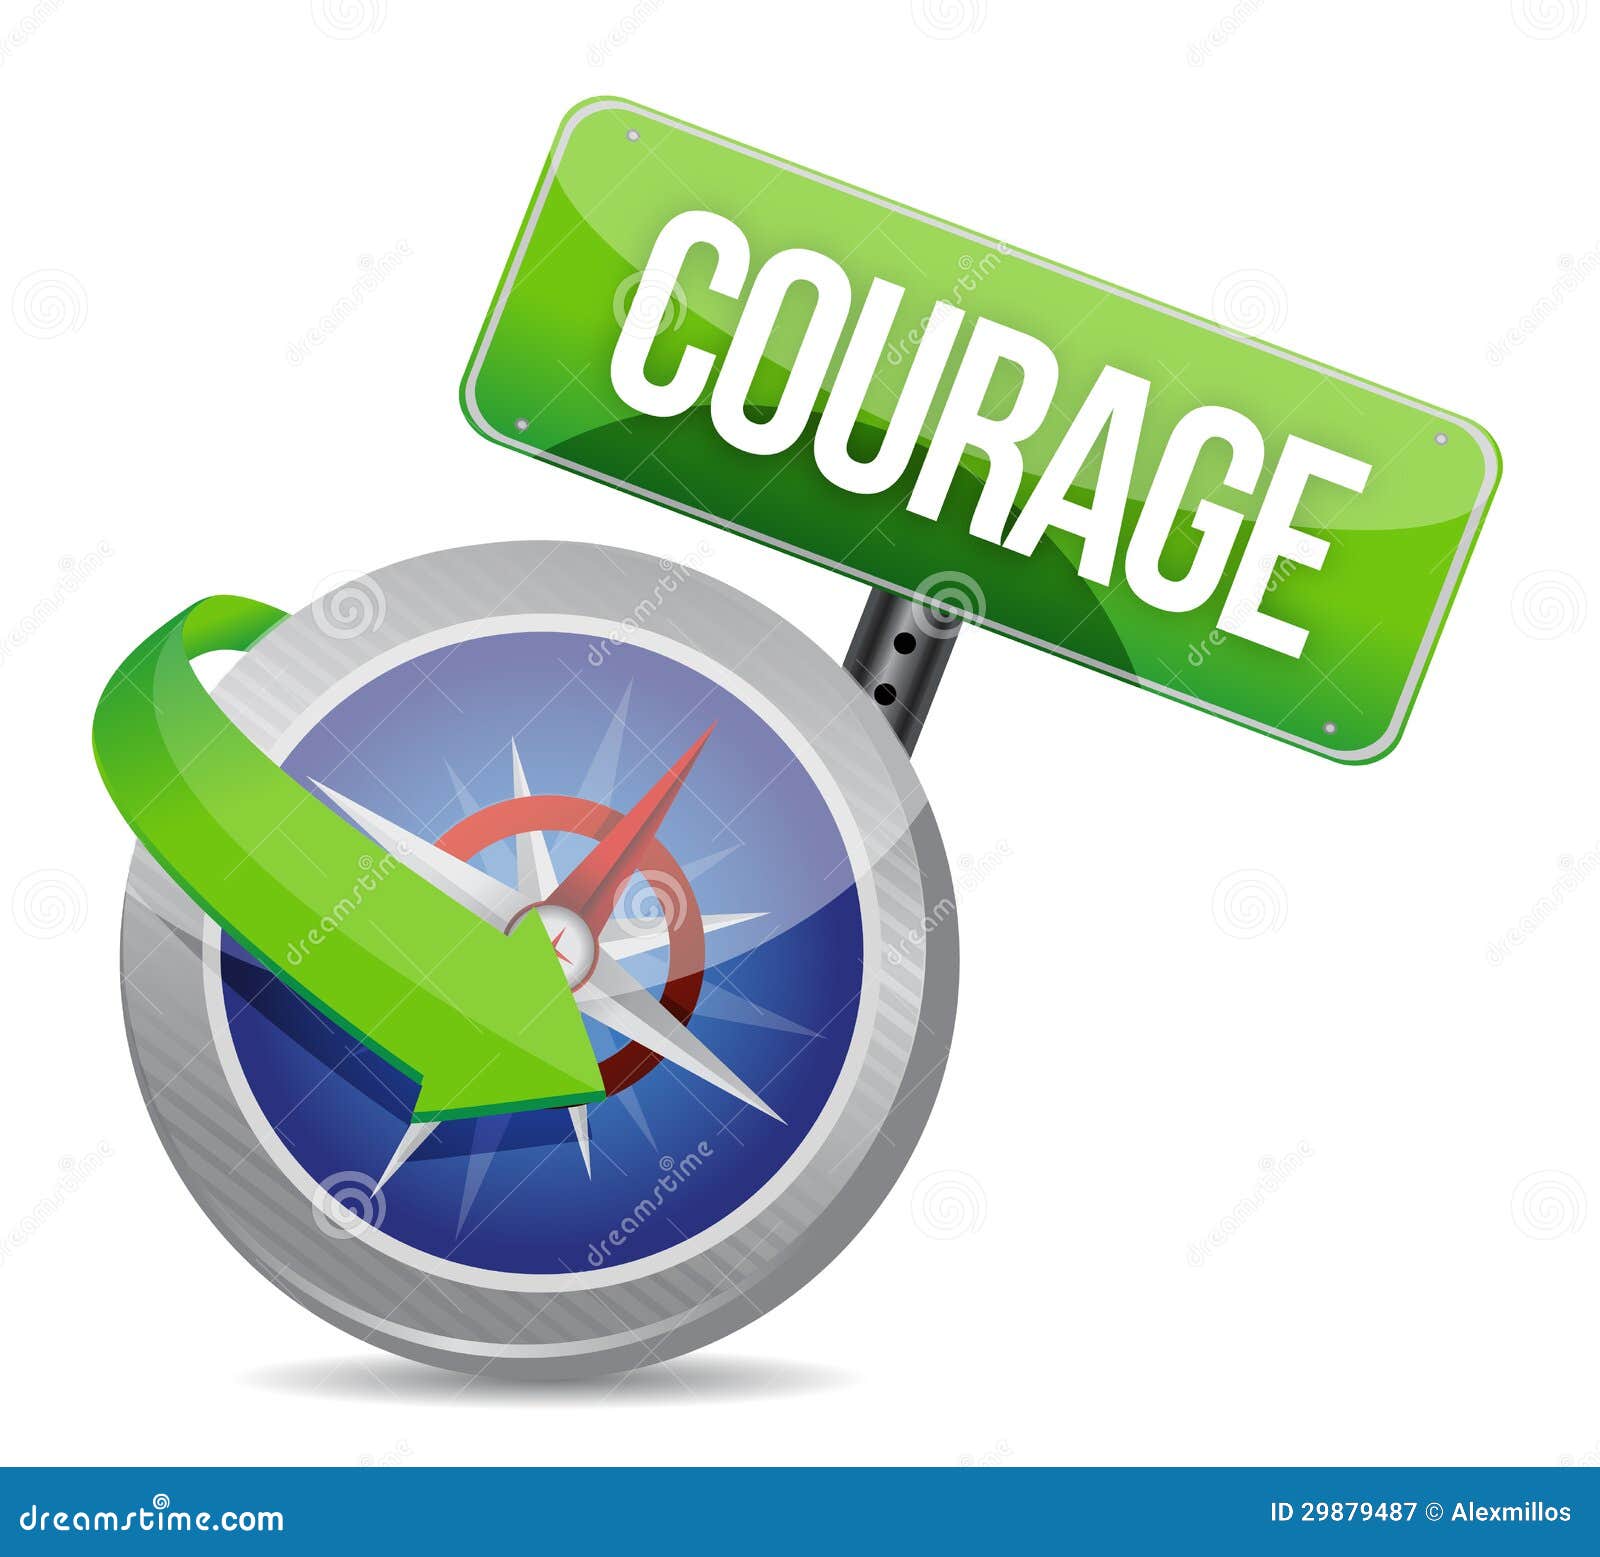 courage clipart illustrations - photo #3